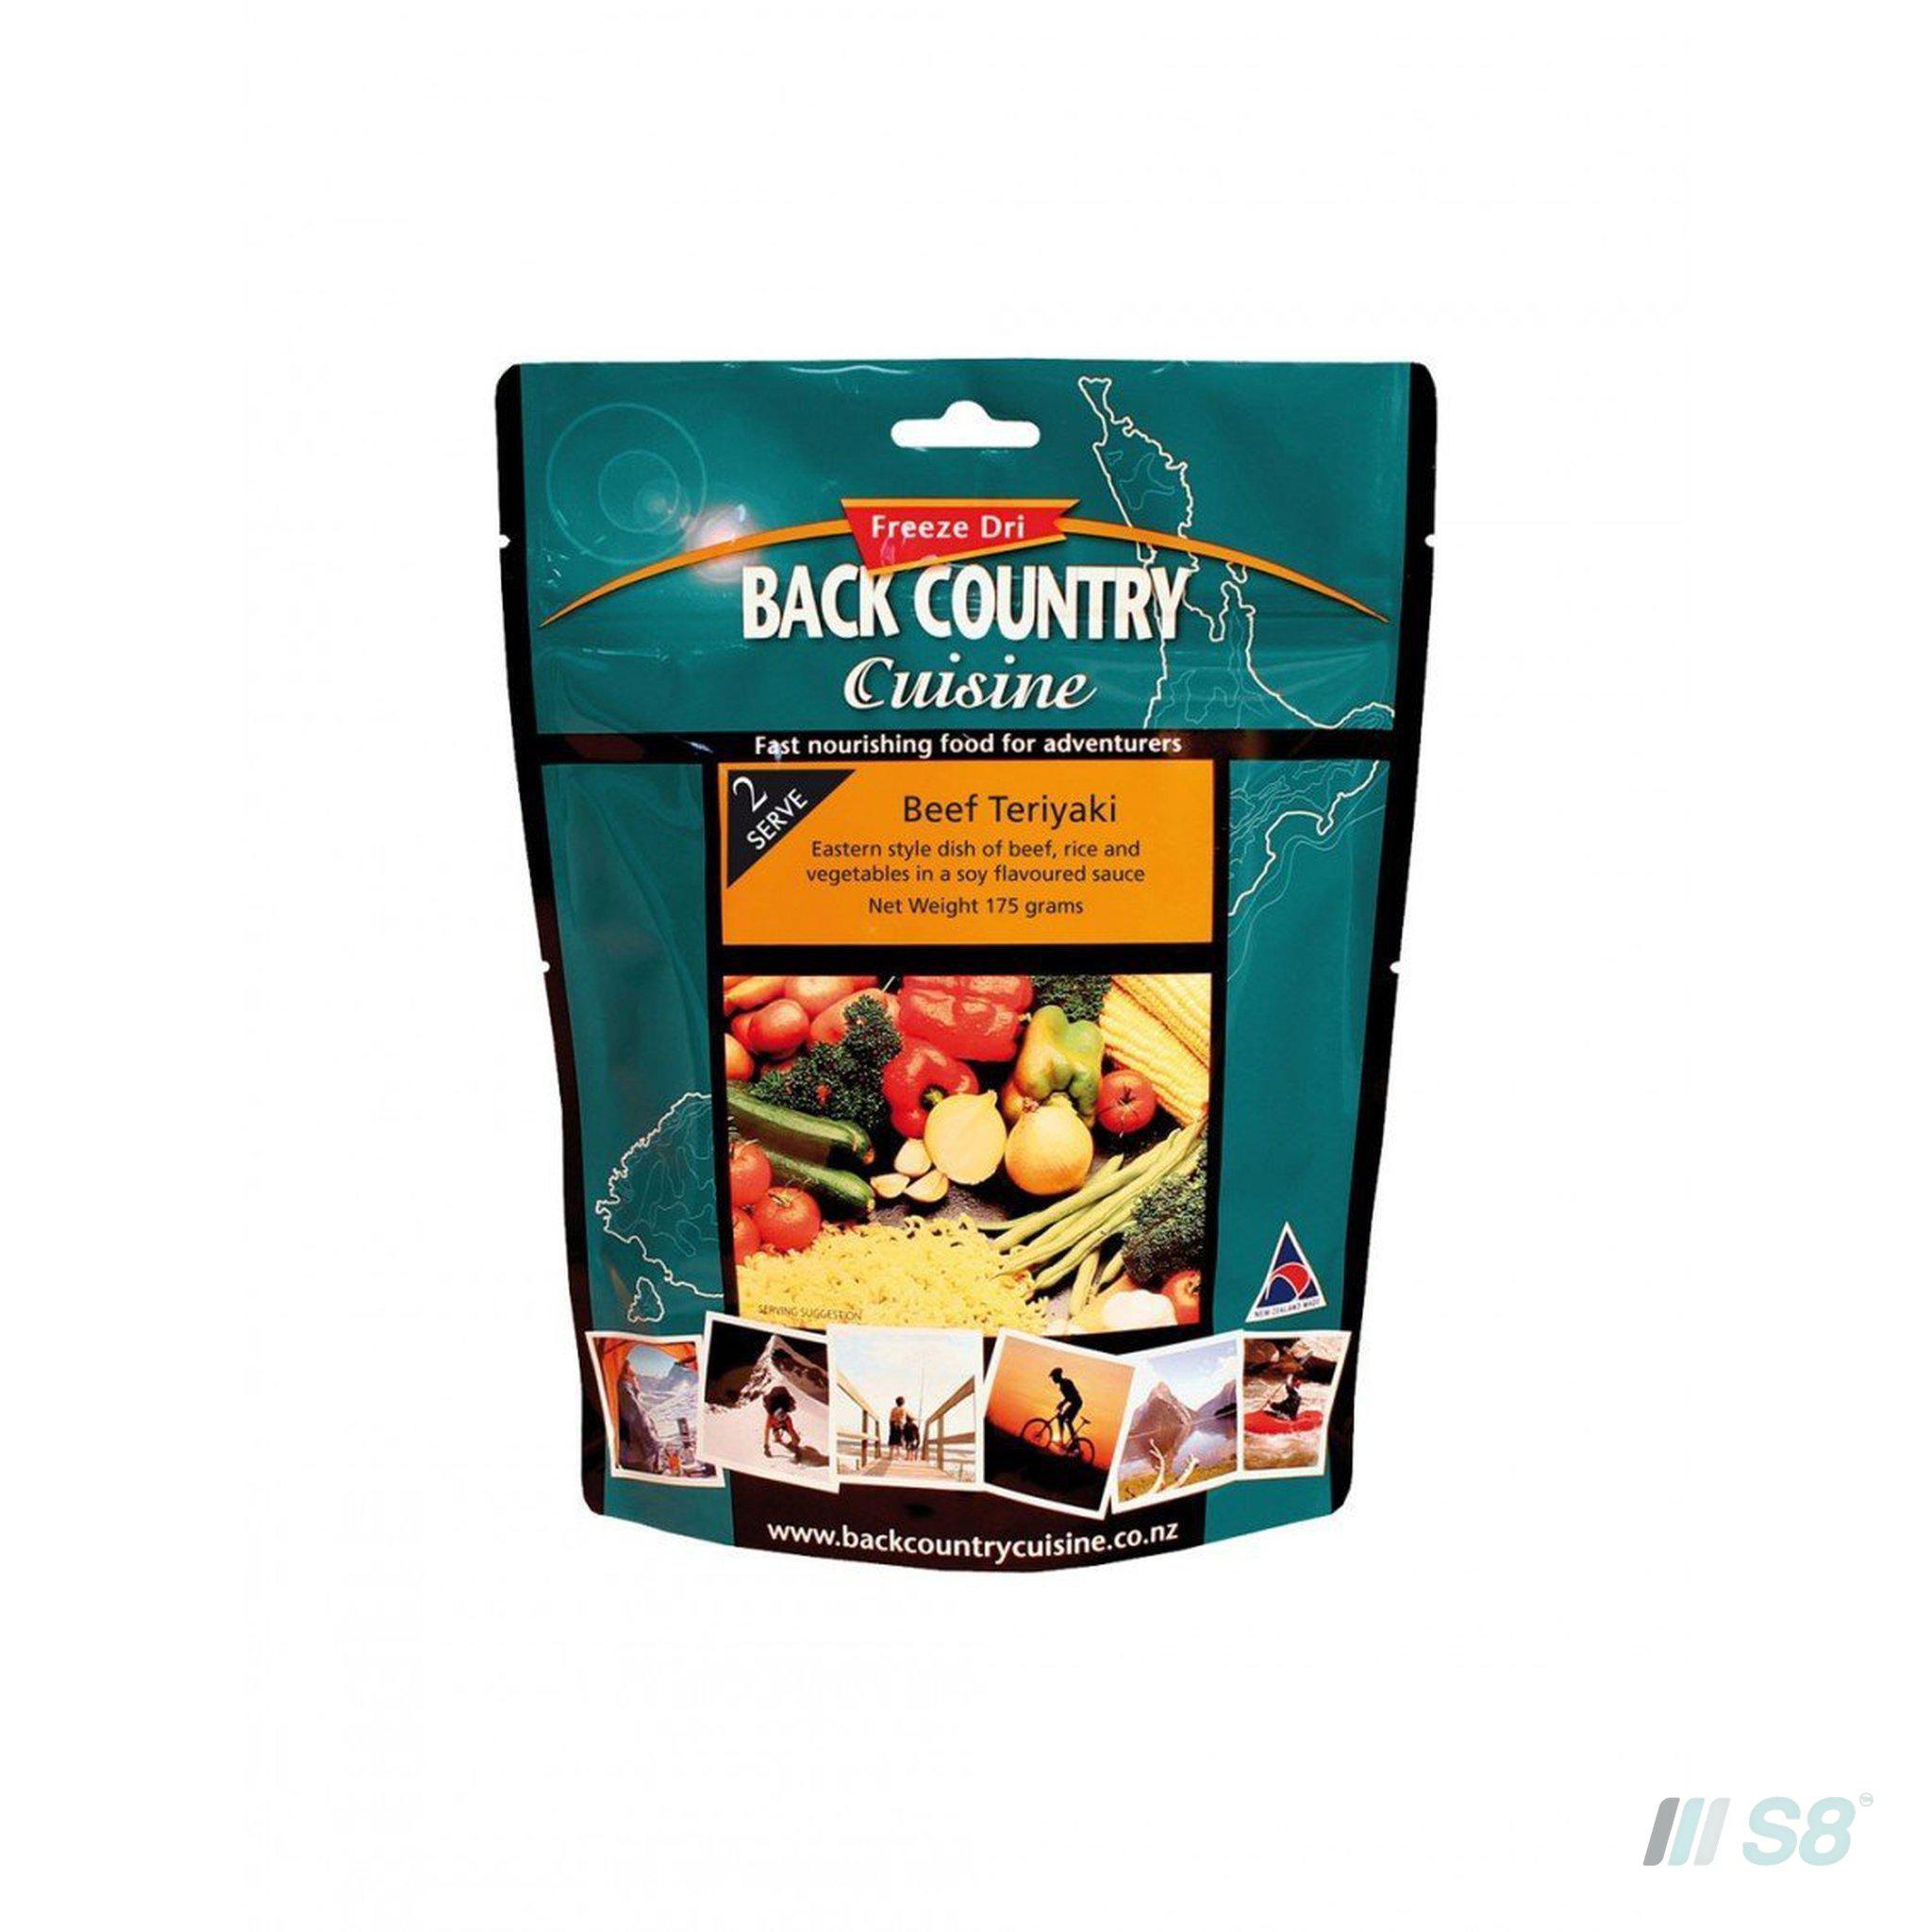 Back Country Cuisine Beef Teriyaki-BCC-S8 Products Group